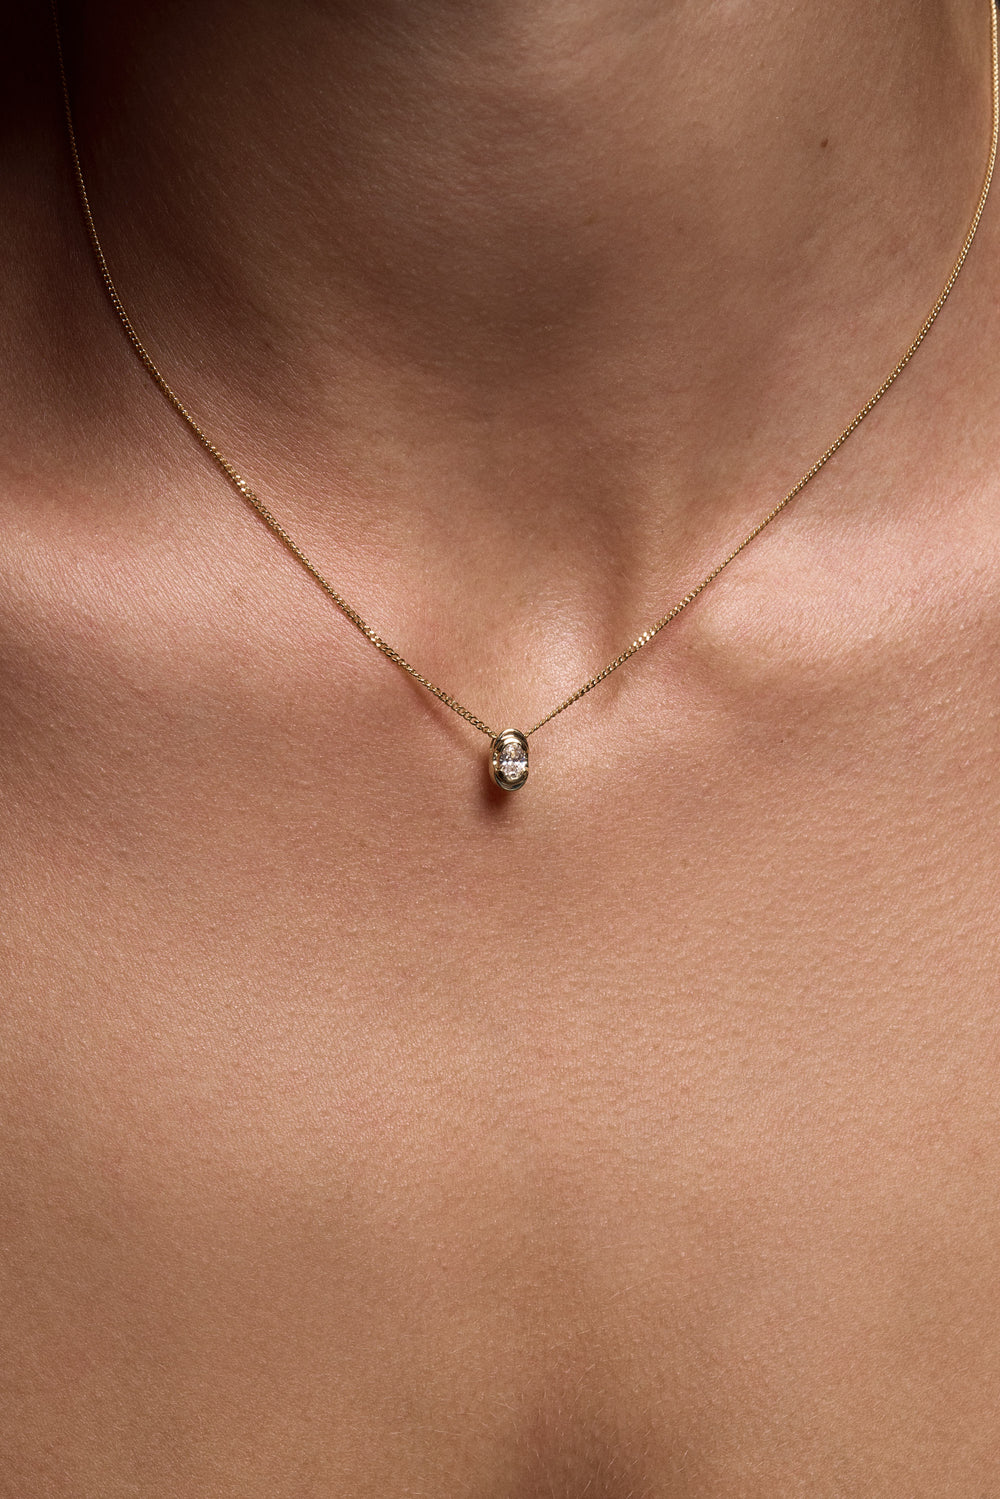 Mini Oval Diamond Necklace | 9K Yellow or Rose Gold, More Options Available| Natasha Schweitzer